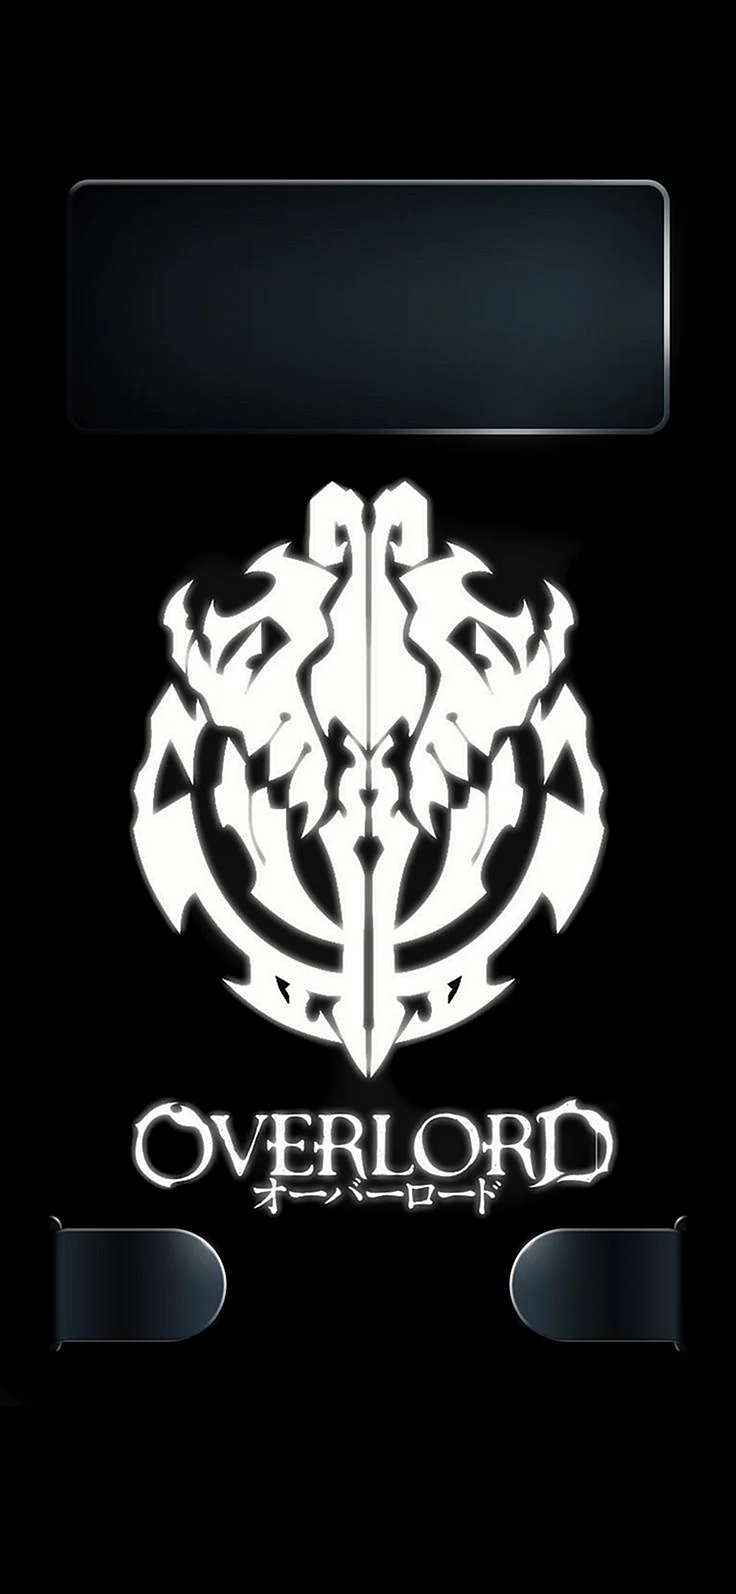 Overlord Logo Wallpaper For iPhone